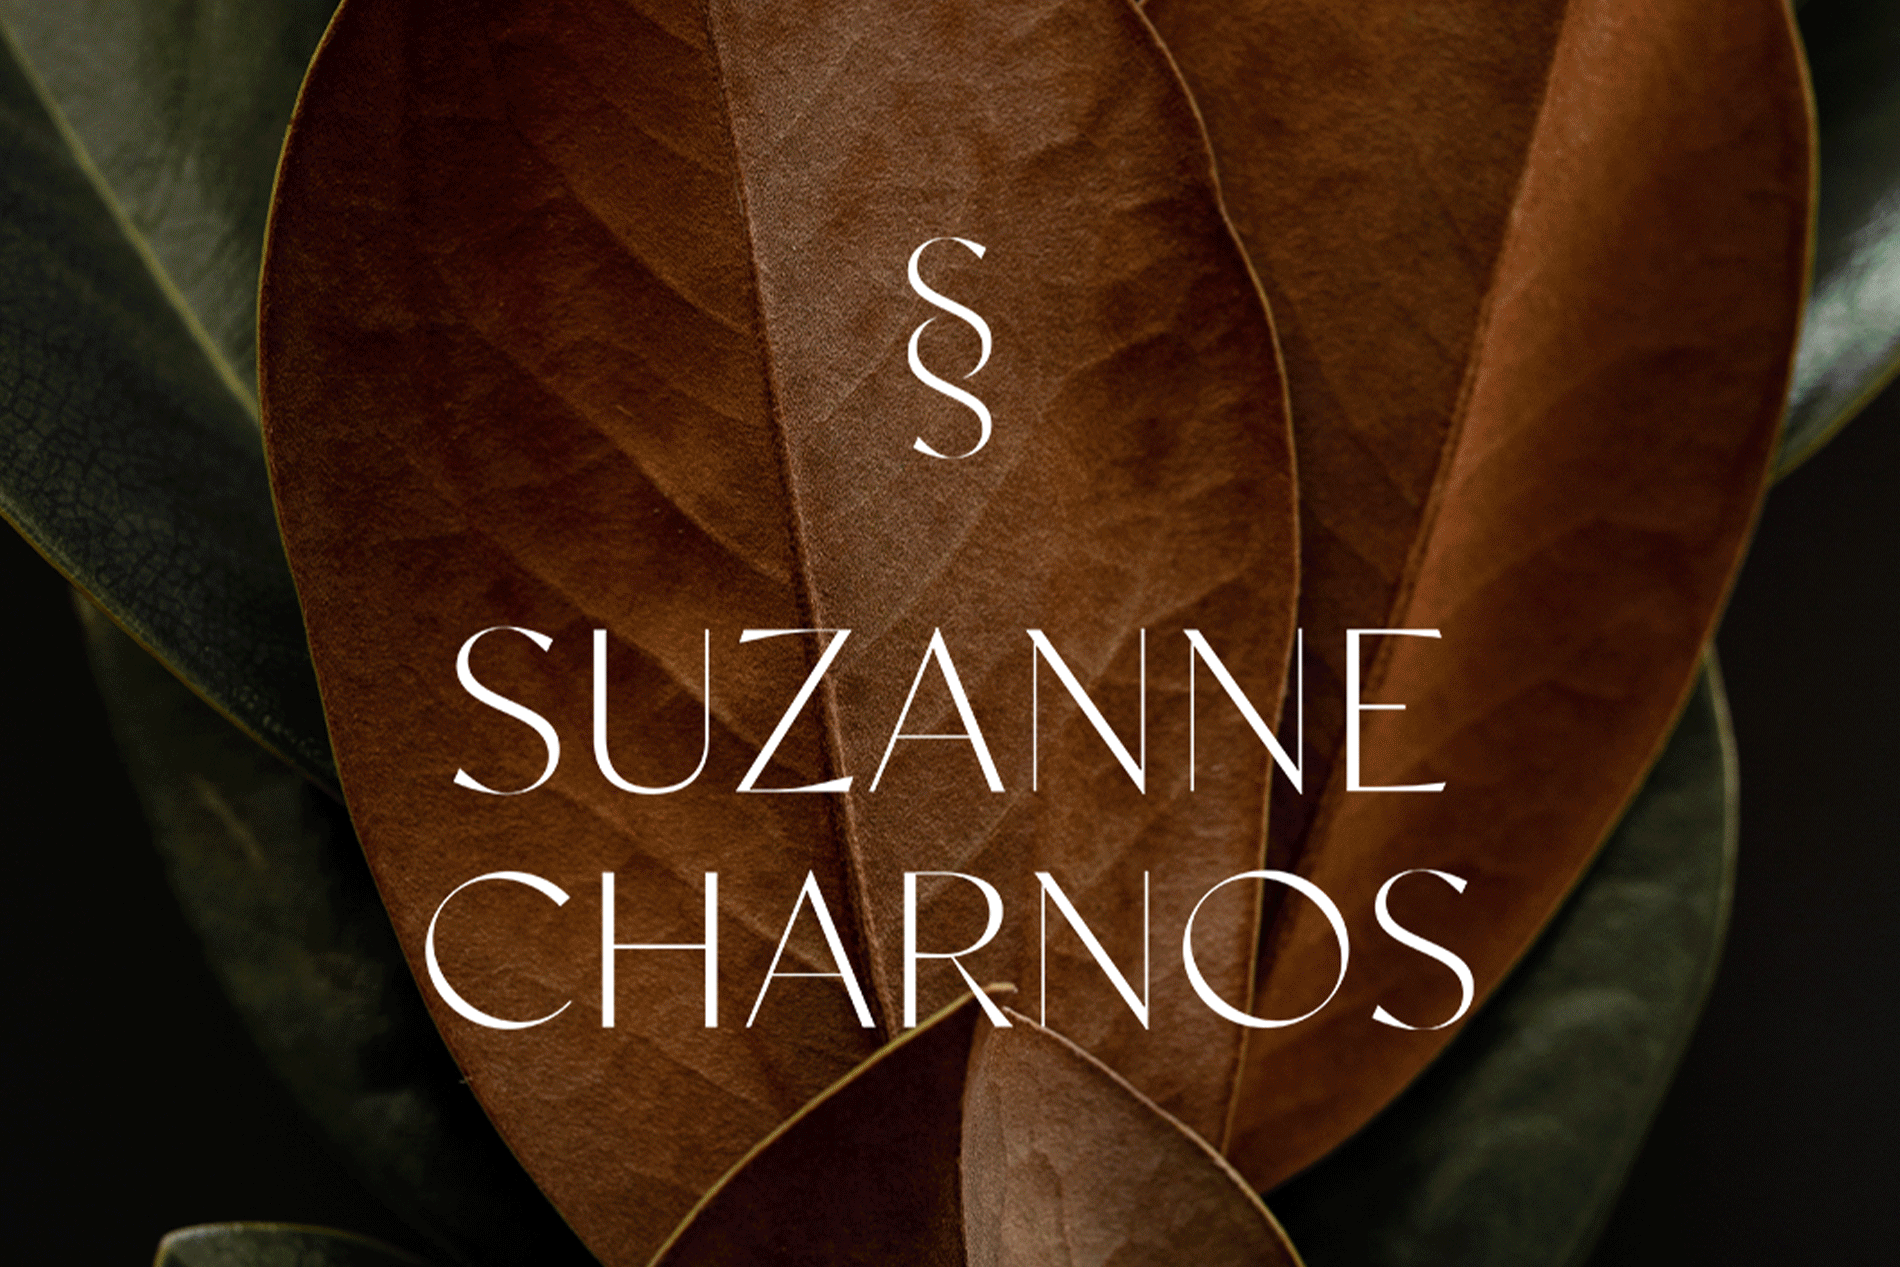 View Suzanne Charnos project